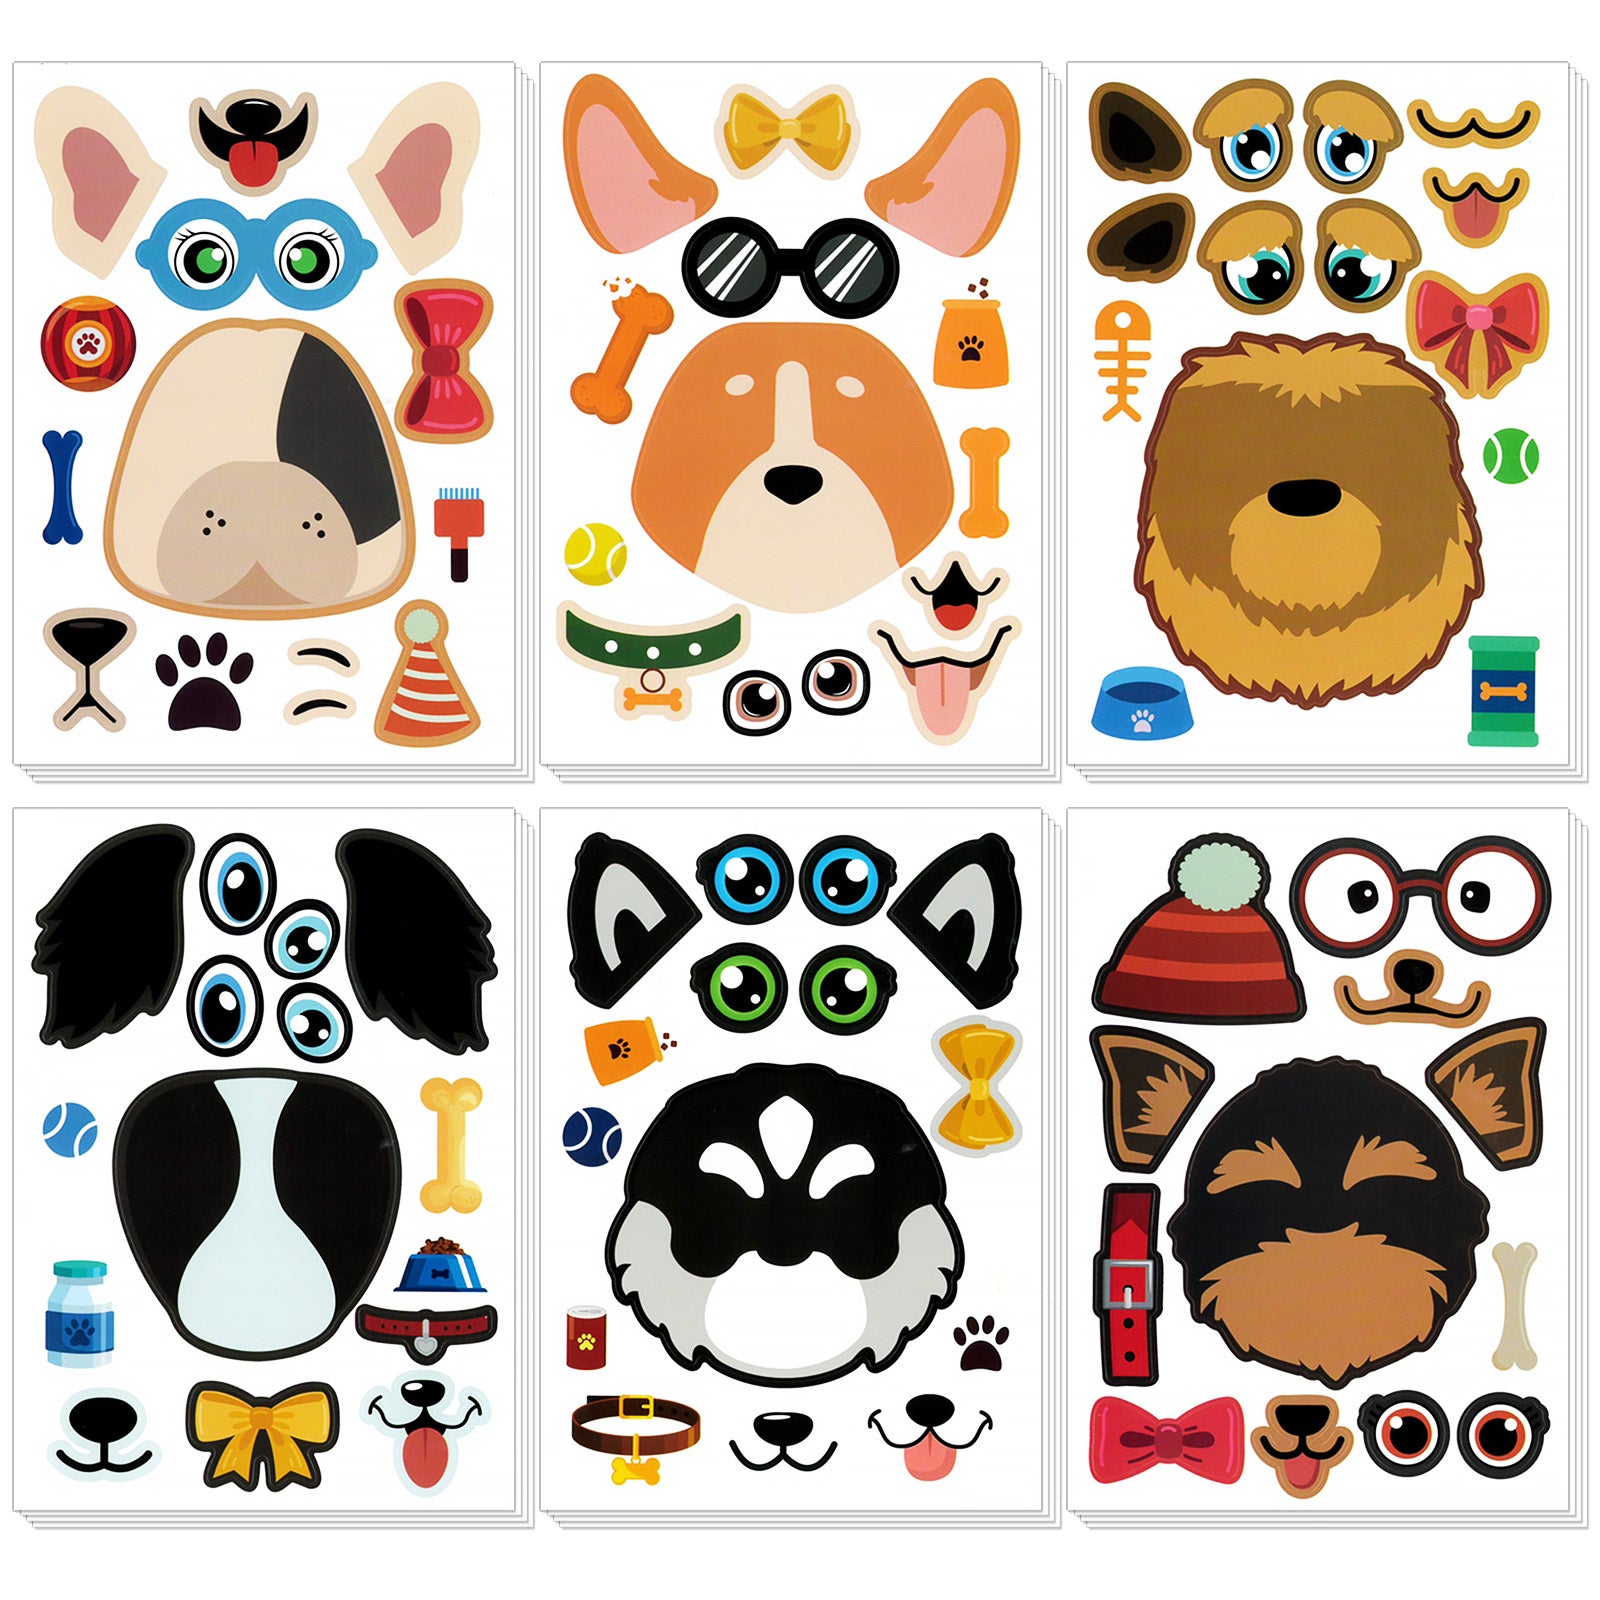 Wrapables Make Your Own Sticker Sheets, DIY Make a Face Animal, Food